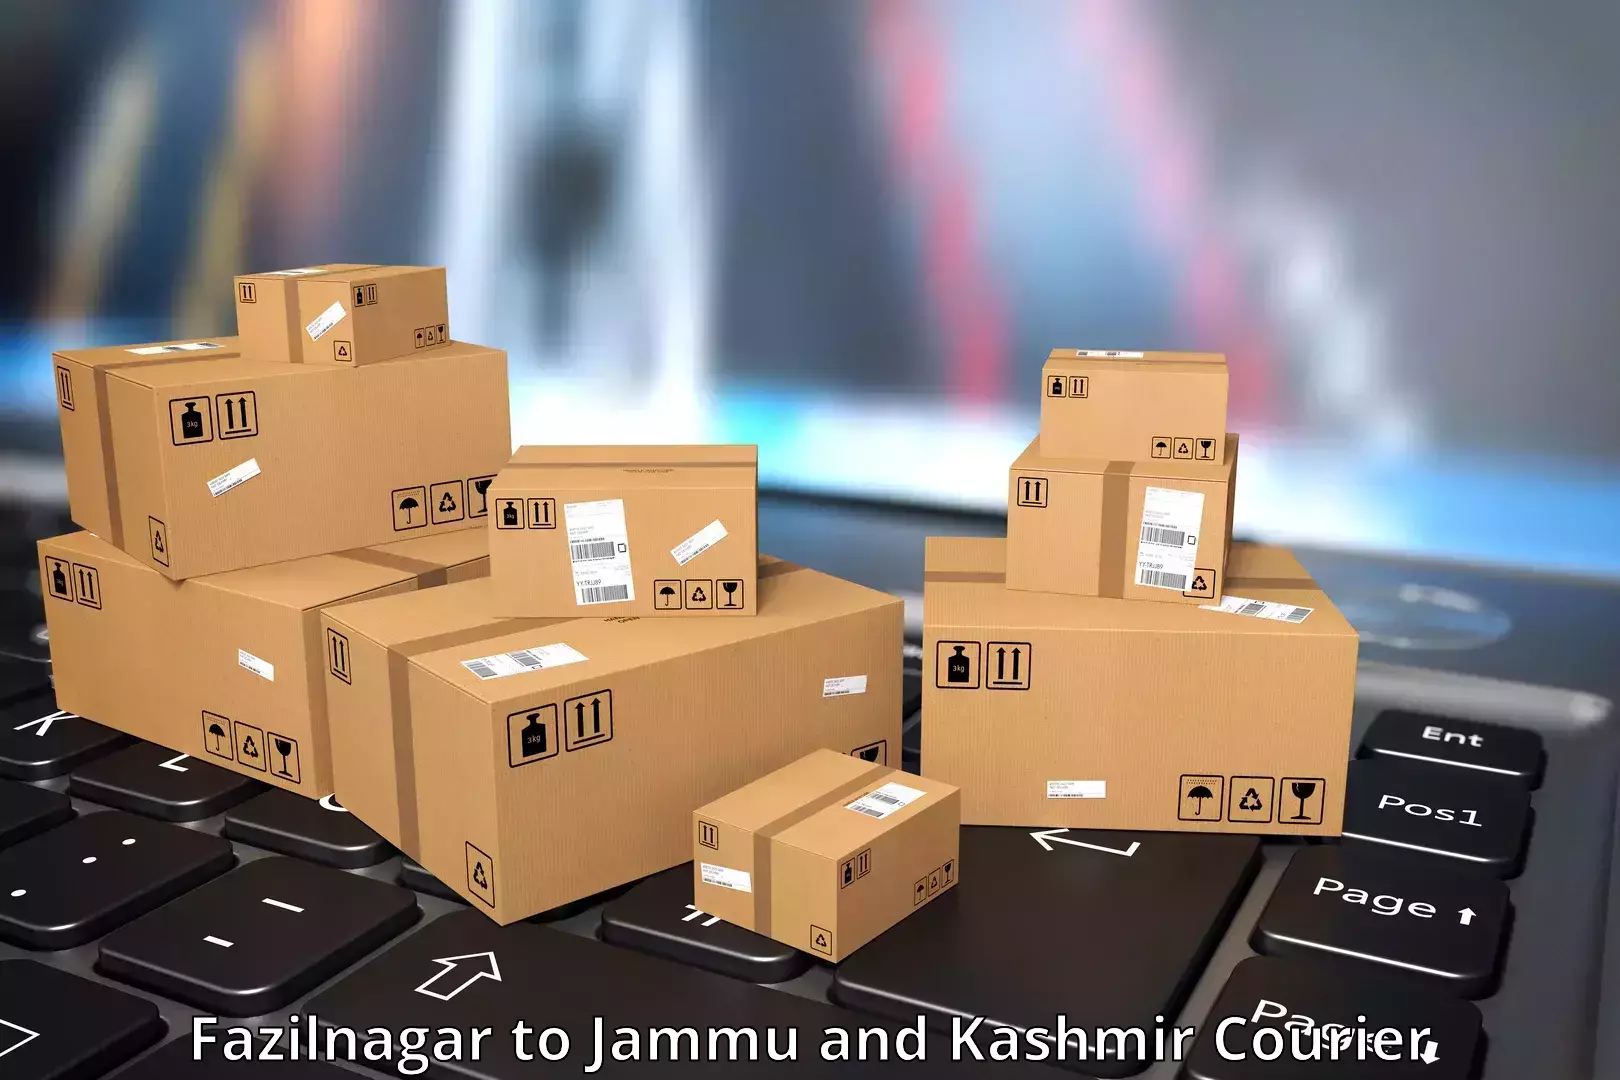 Reliable delivery network Fazilnagar to Jammu and Kashmir